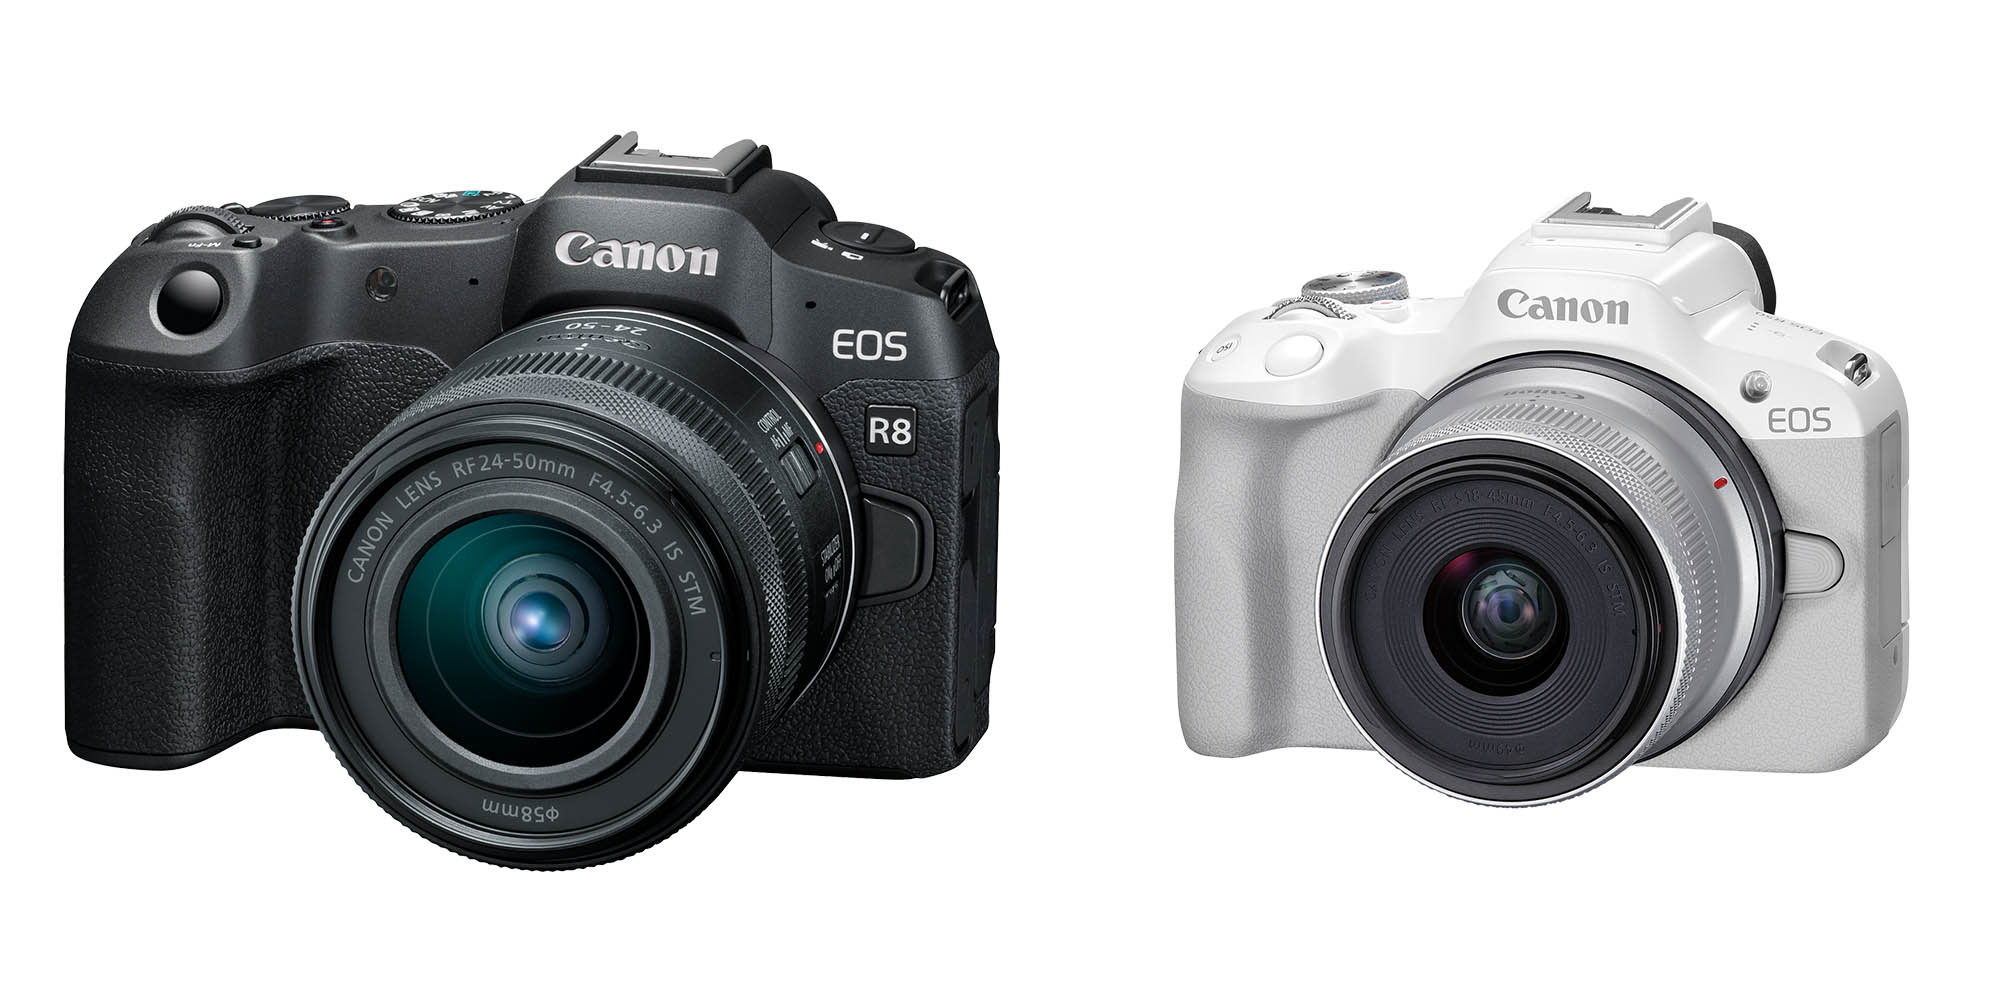 Canon Unveils the Lightest Full Frame EOS R mirrorless camera EOS R8 and  the lightest and smallest APS-C EOS R Mirrorless Cameras EOS R50, New RF  lens RF 24-50mm f/4.5-6.3 IS STM